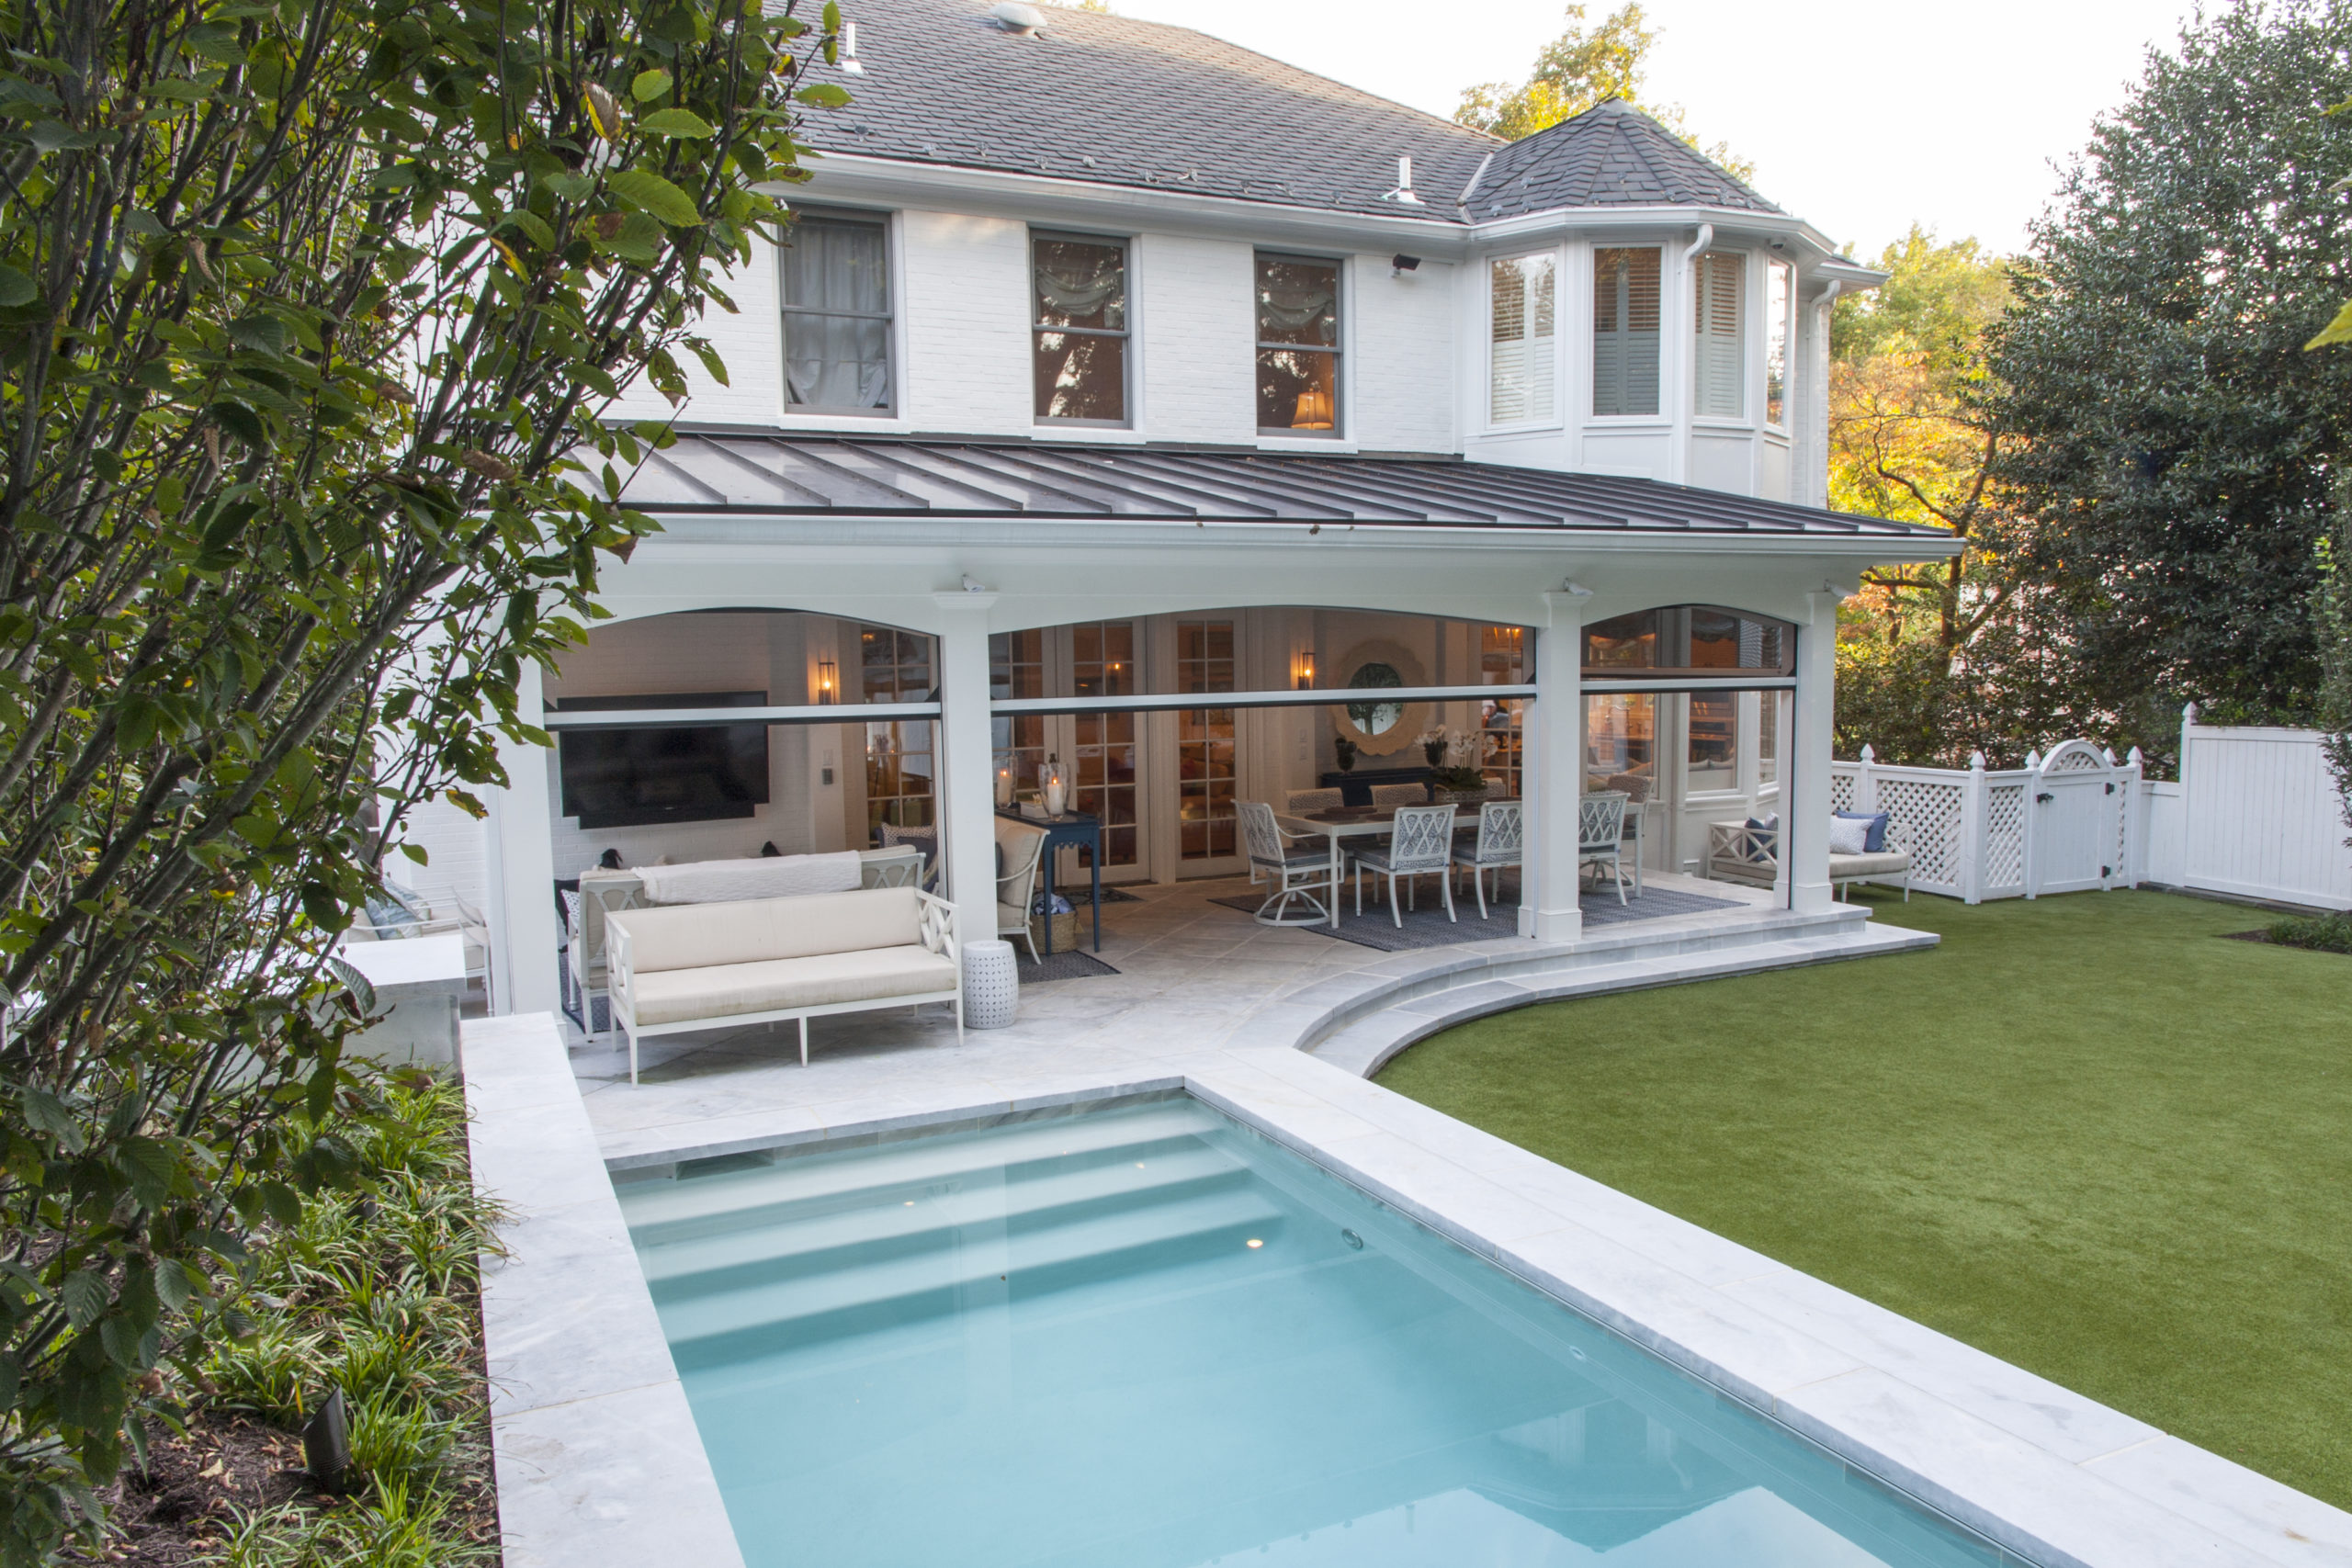 A white house with a stunning pool and patio area, exuding luxury and elegance.